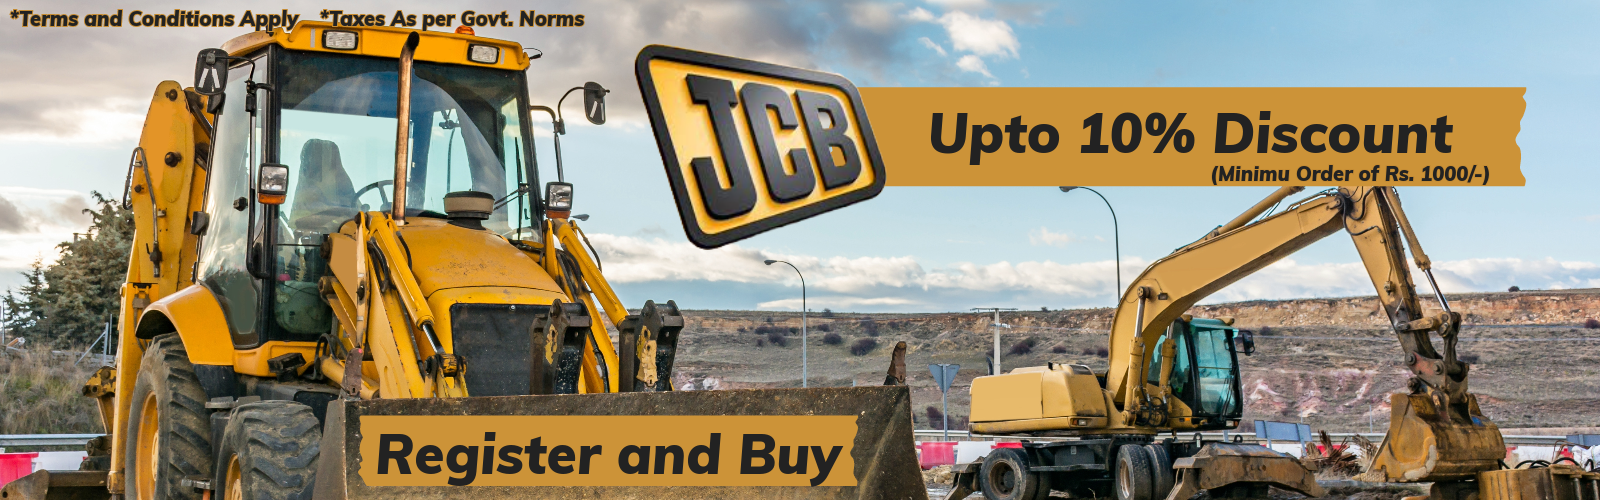 JCB Upto 10% Discount web banner with Register and Buy Now invite